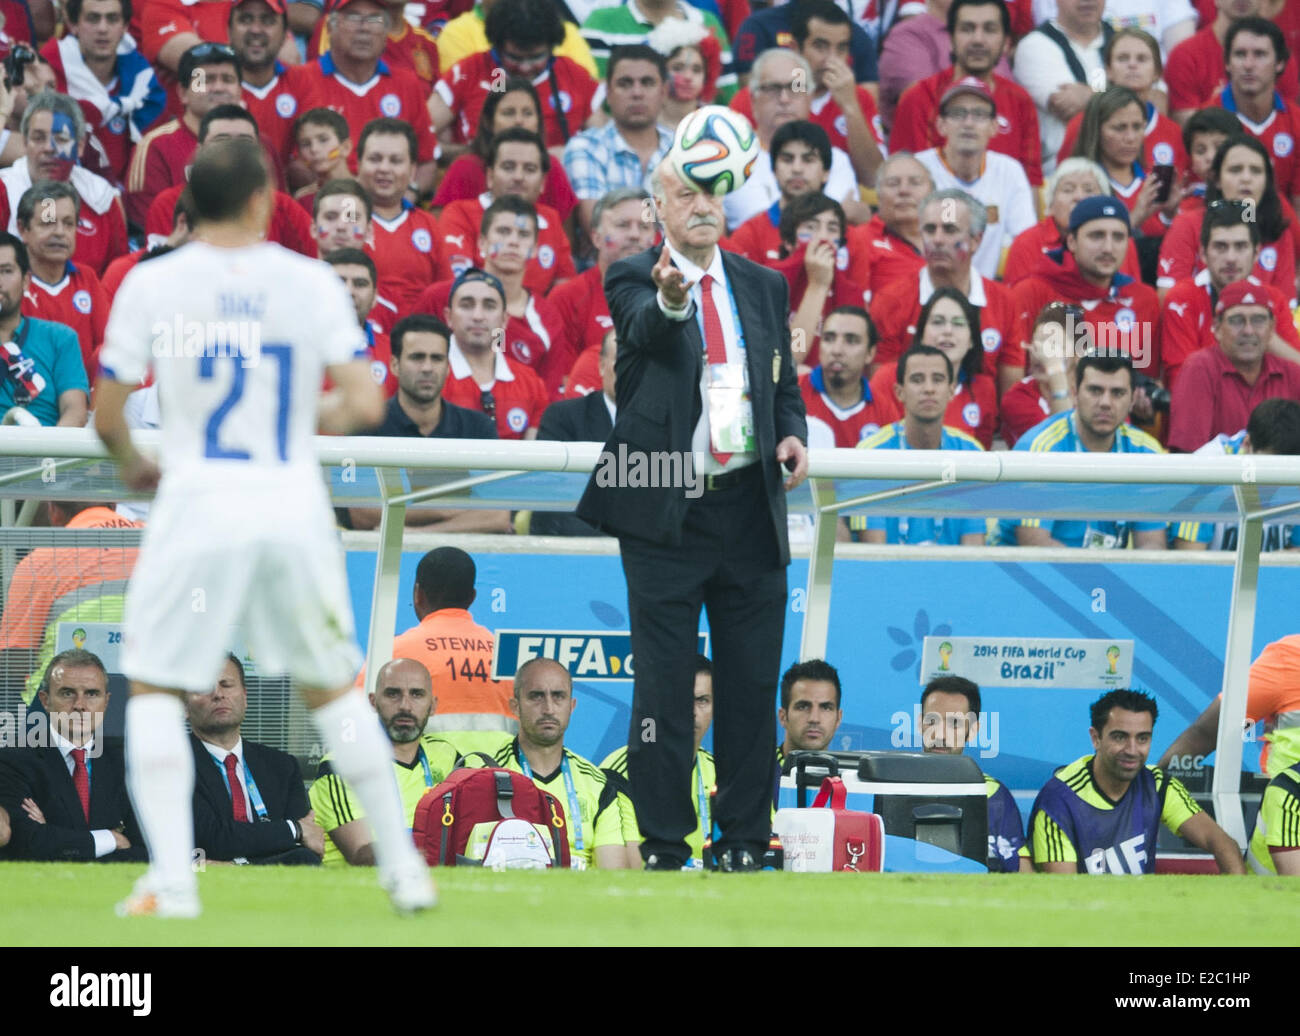 Porto Alegre, Brazil. 18th June, 2014.  Vicente del Bosque in the match between Spain and Chile in the group stage of the 2014 World Cup, for the group B match at the Beira Rio stadium, on June 18, 2014  Credit:  Urbanandsport/NurPhoto/ZUMAPRESS.com/Alamy Live News Stock Photo